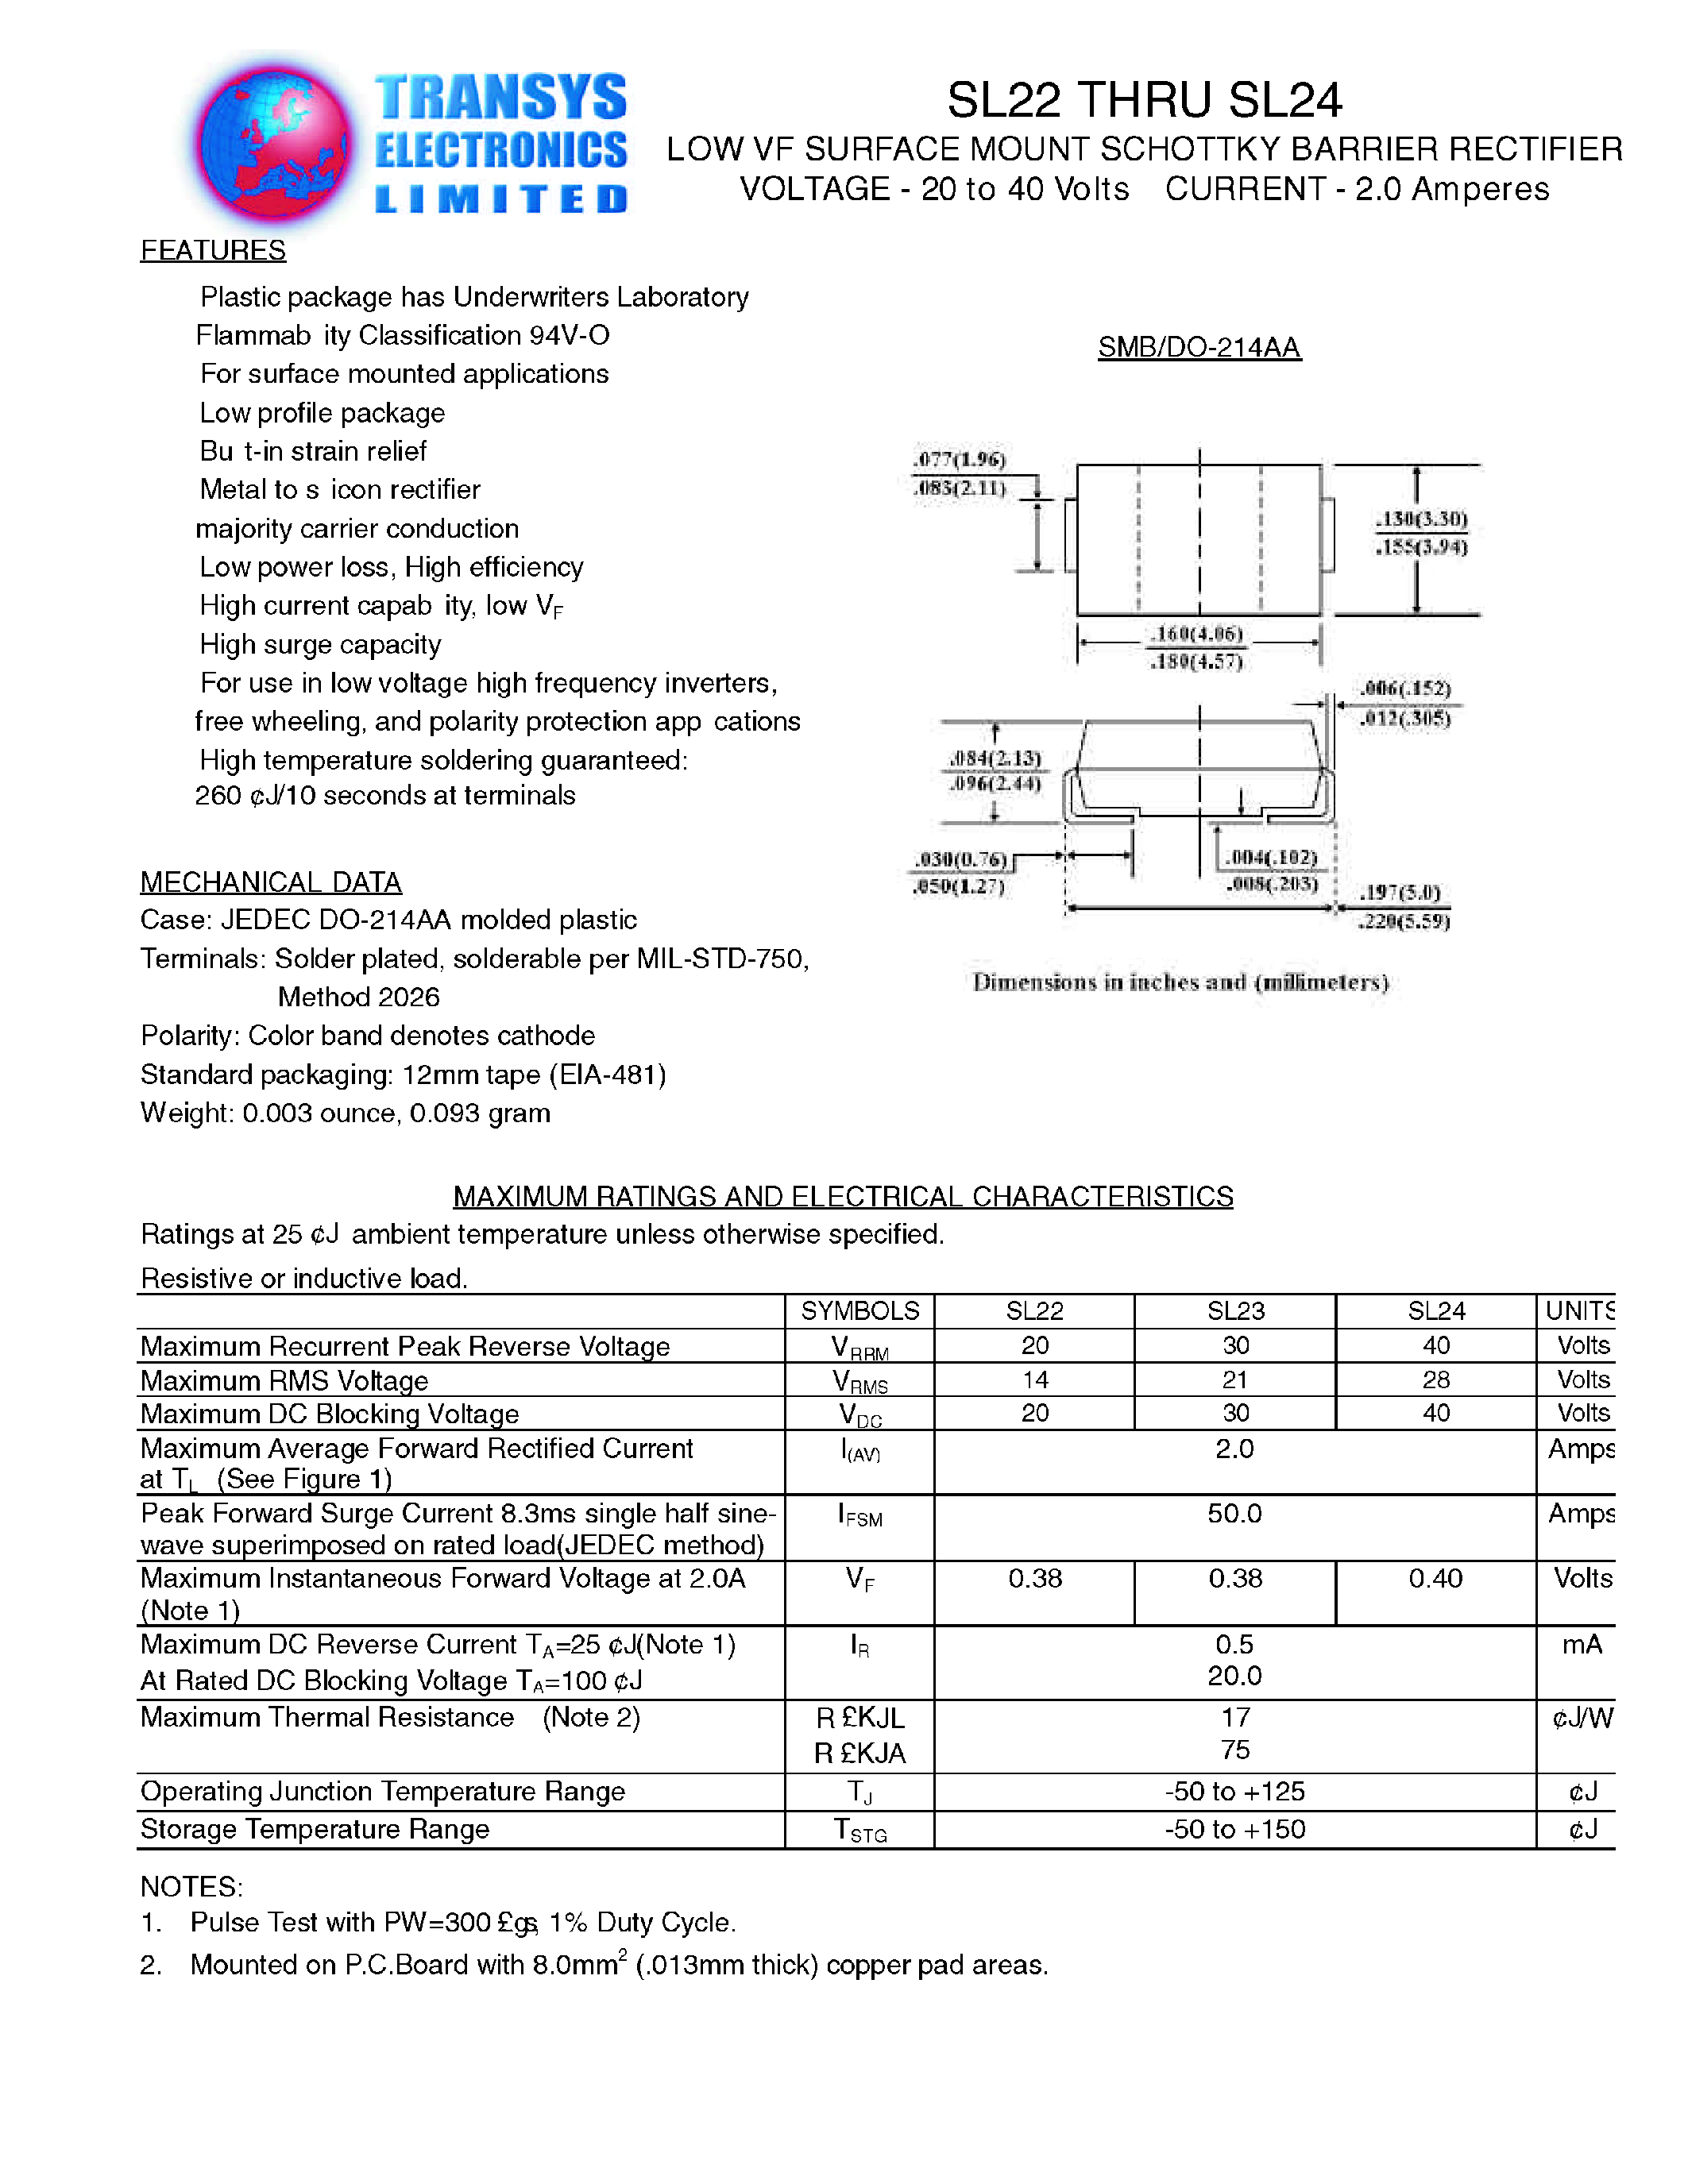 Datasheet SL23 - LOW VF SURFACE MOUNT SCHOTTKY BARRIER RECTIFIER page 1